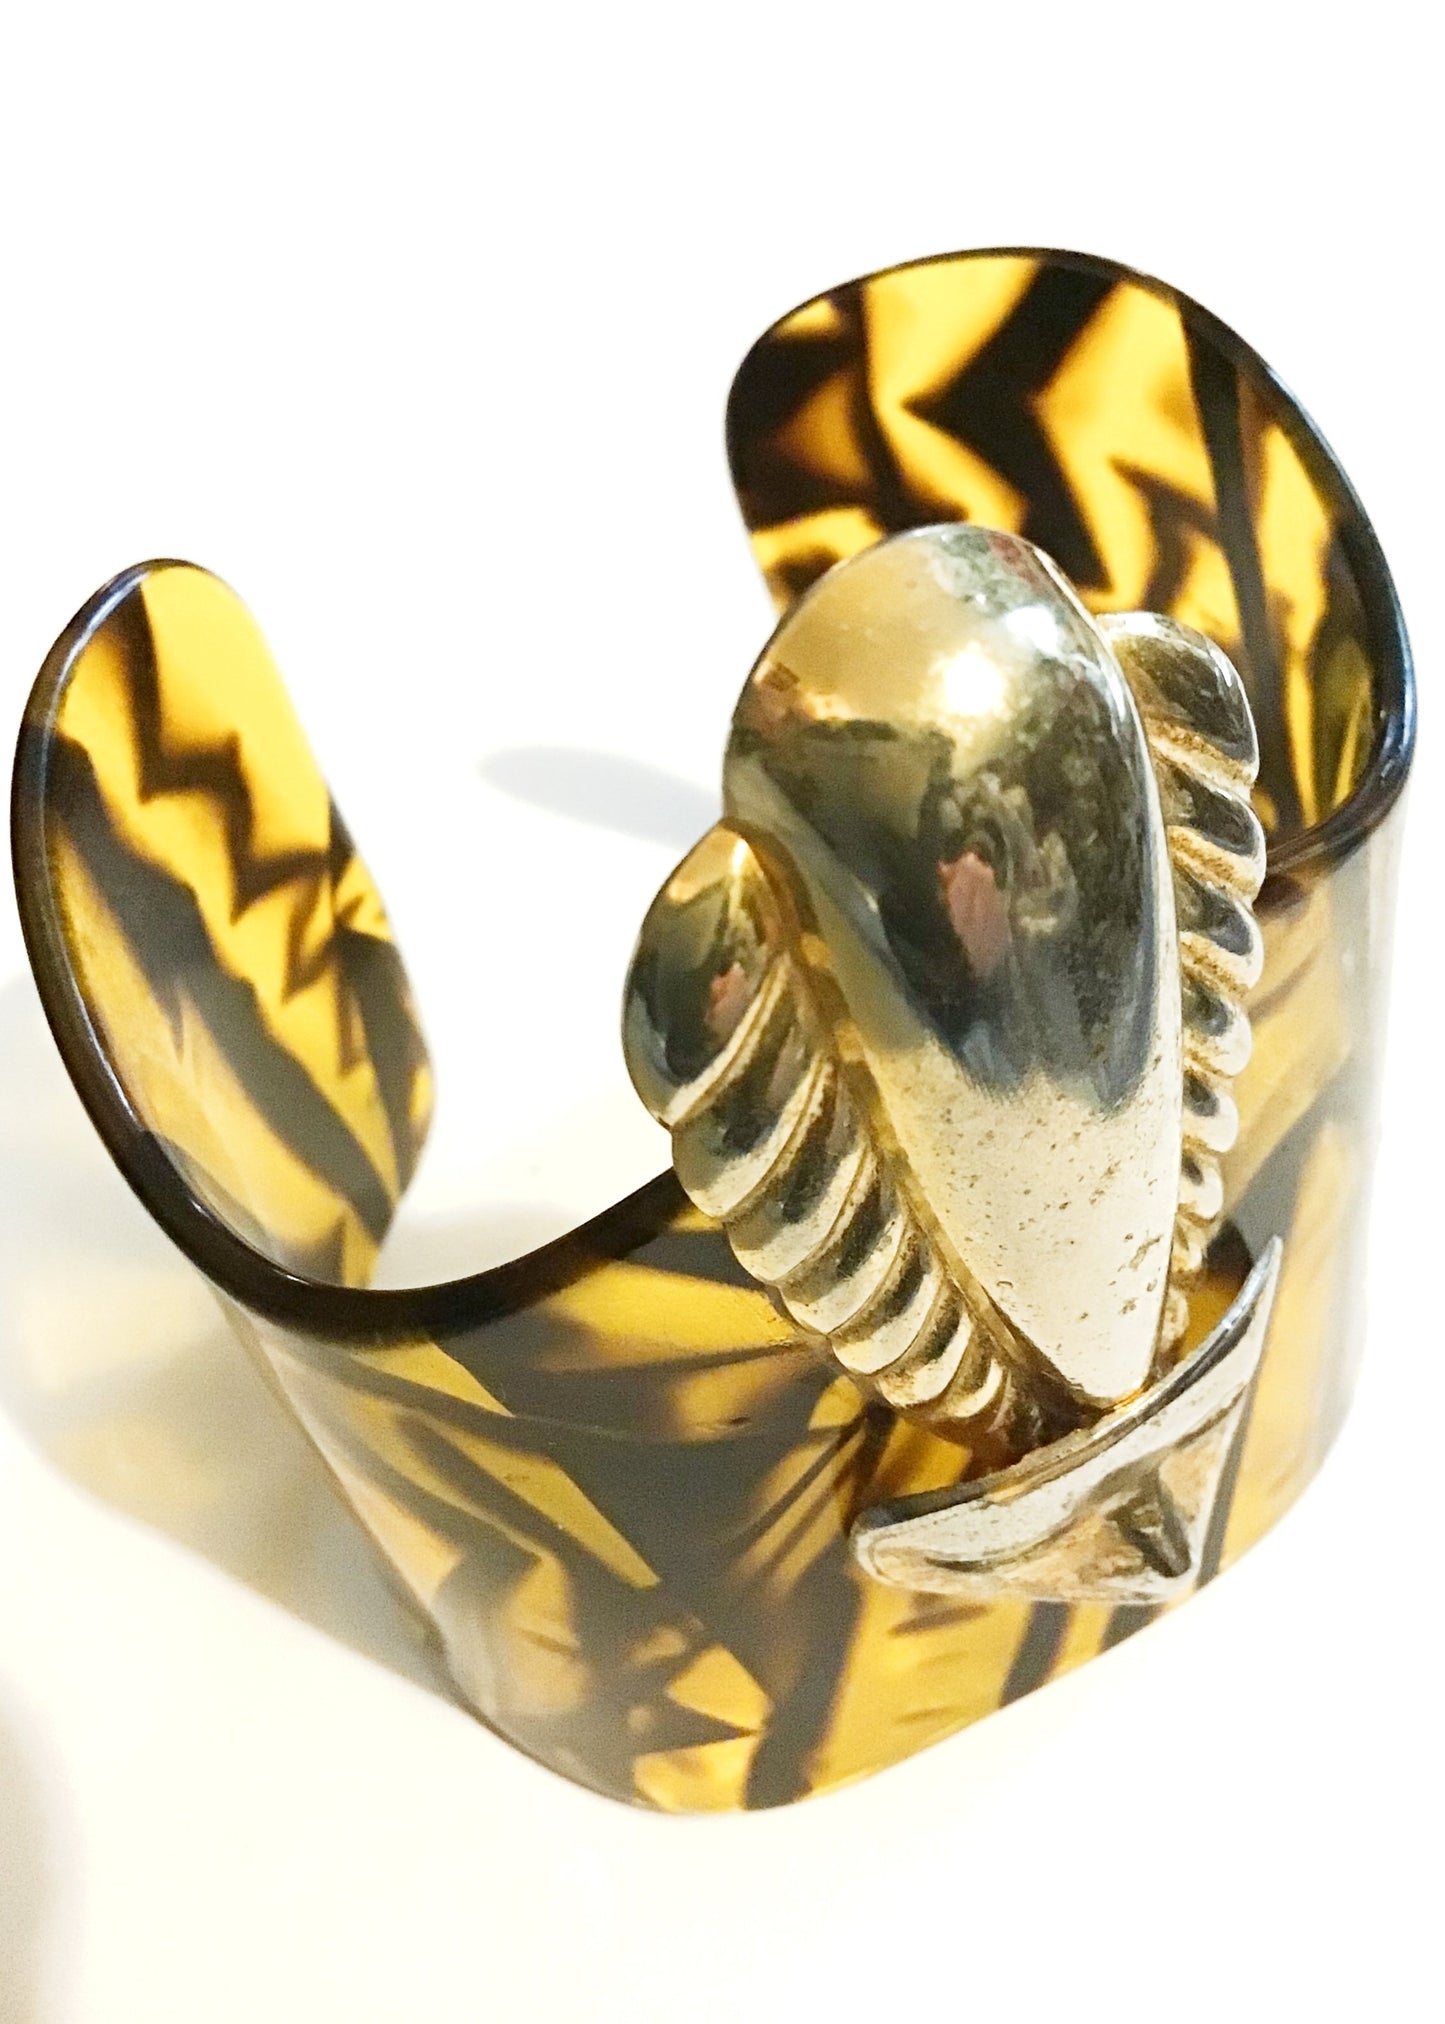 Amazing Faux Tortie Lucite Cuff Bangle Bracelet with Brass Masquerade Face